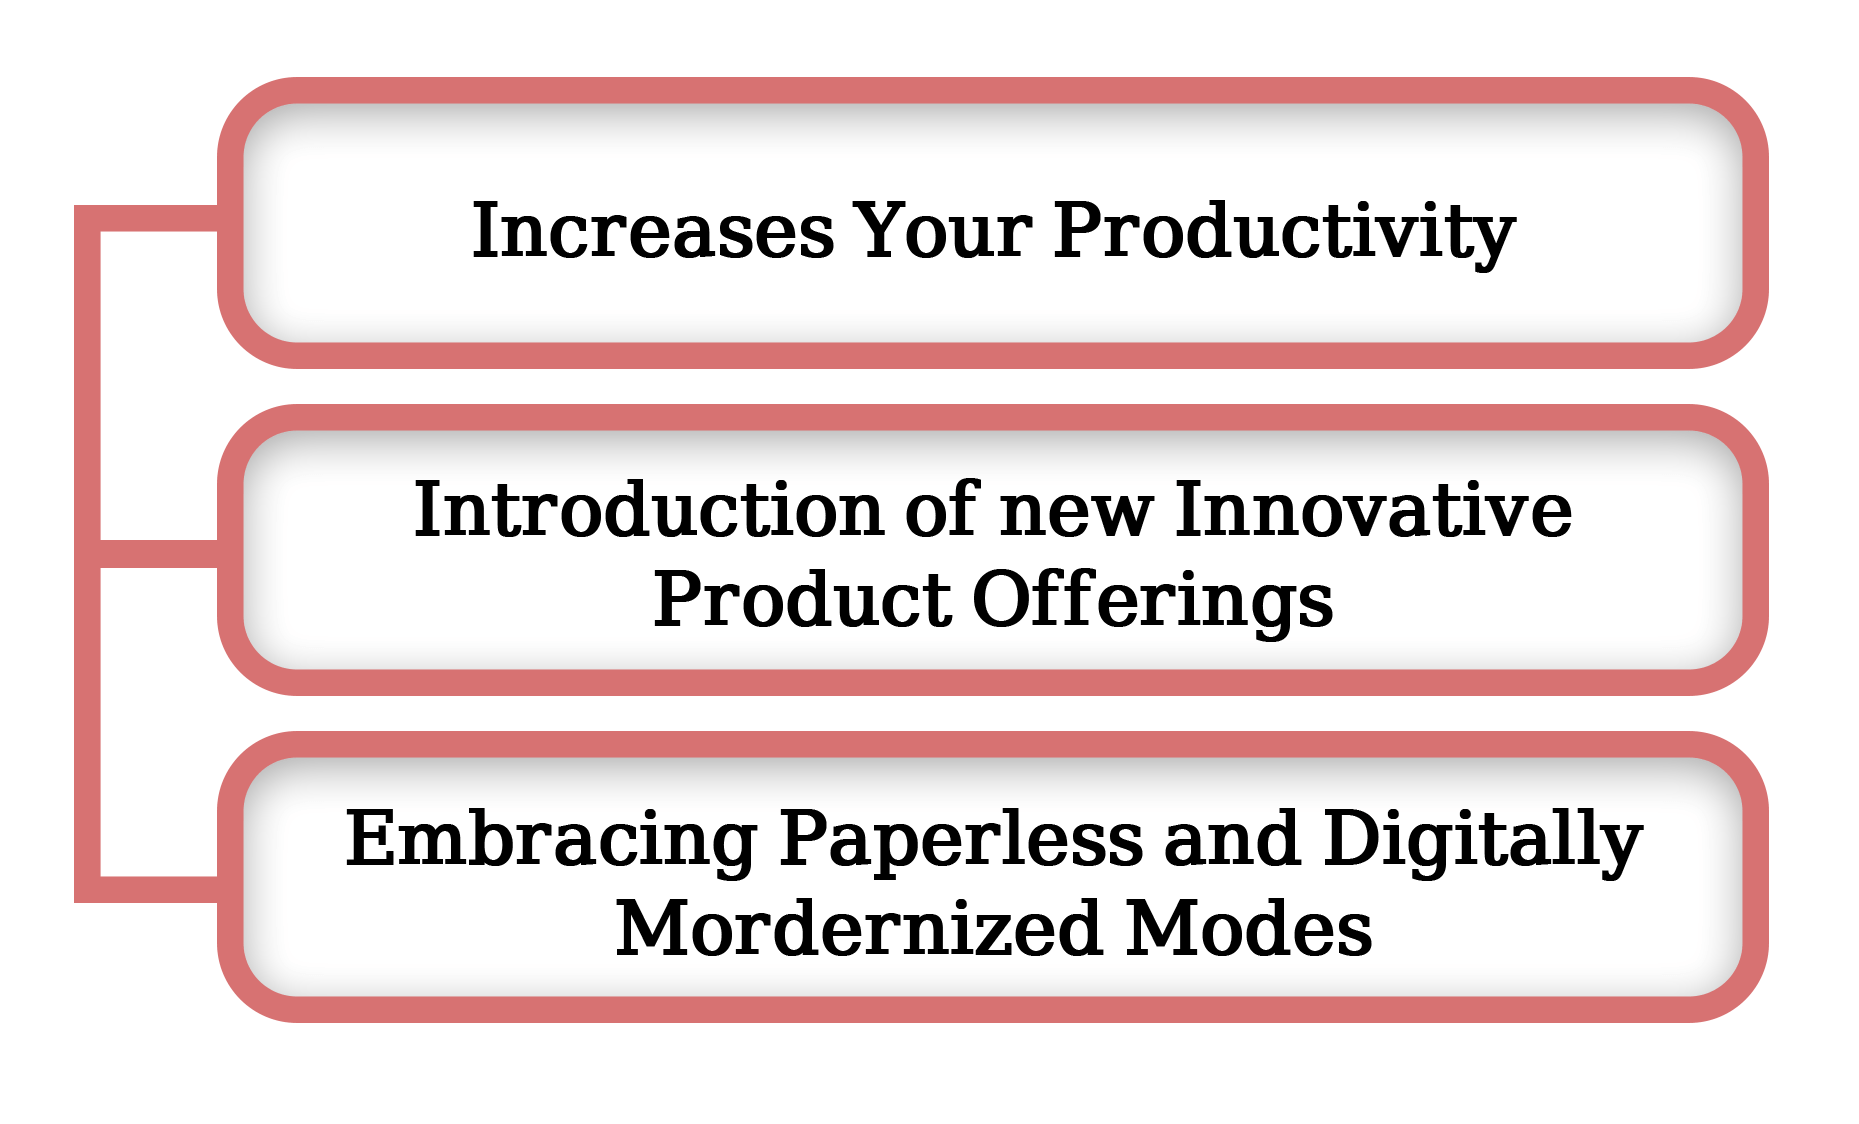 Increase your Productivity